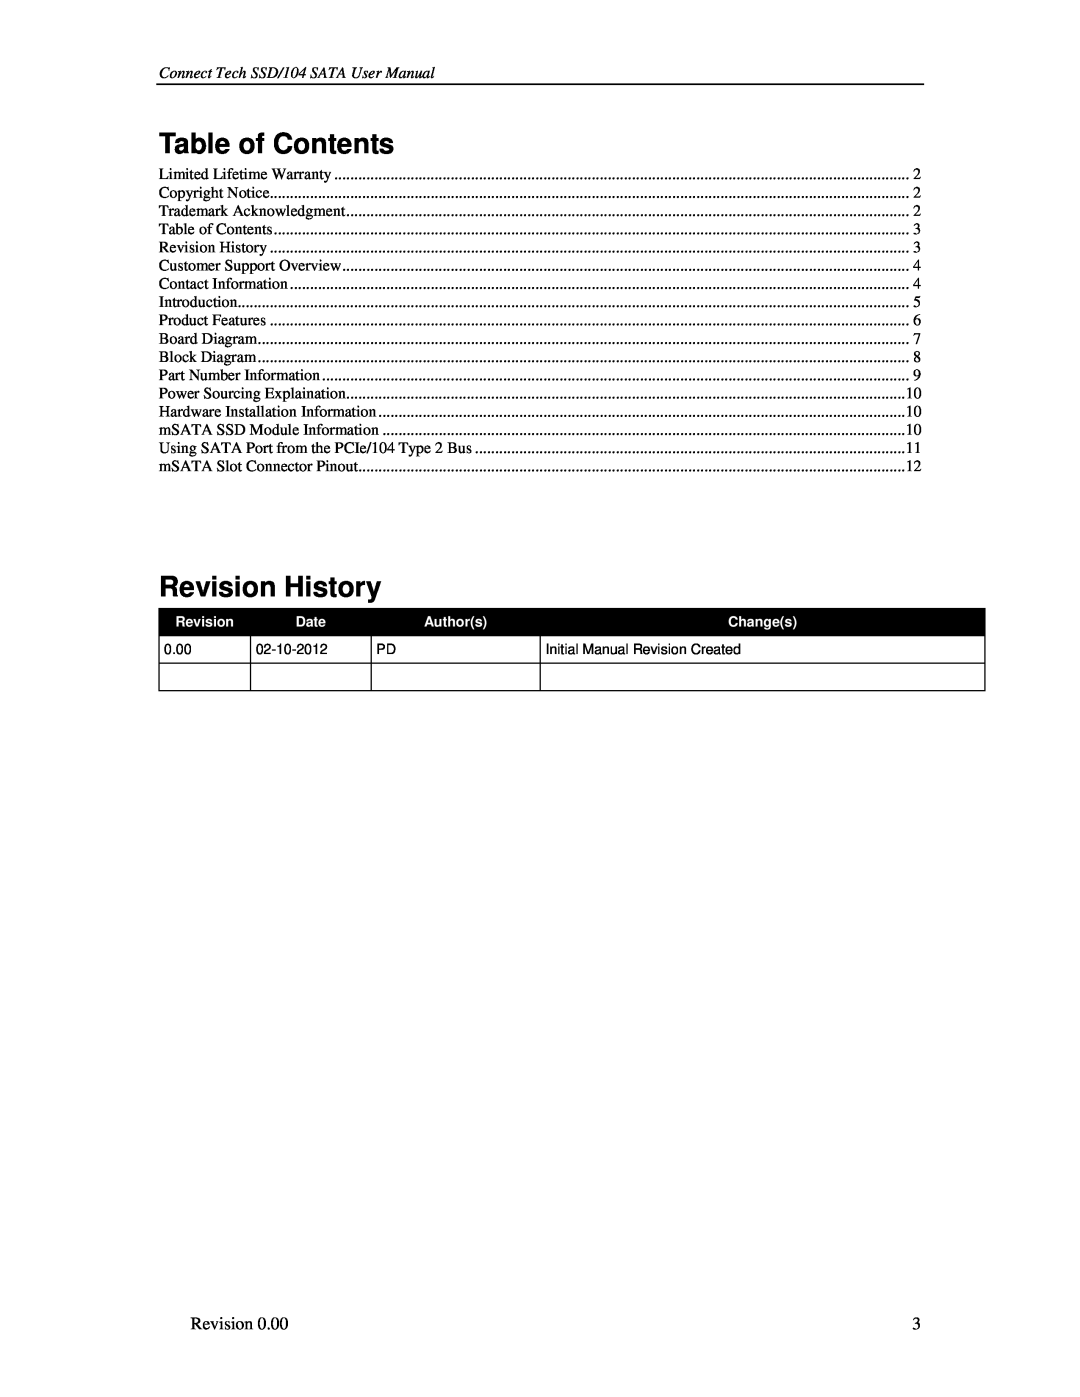 Connect Tech SSD/104 user manual Revision History, Table of Contents 